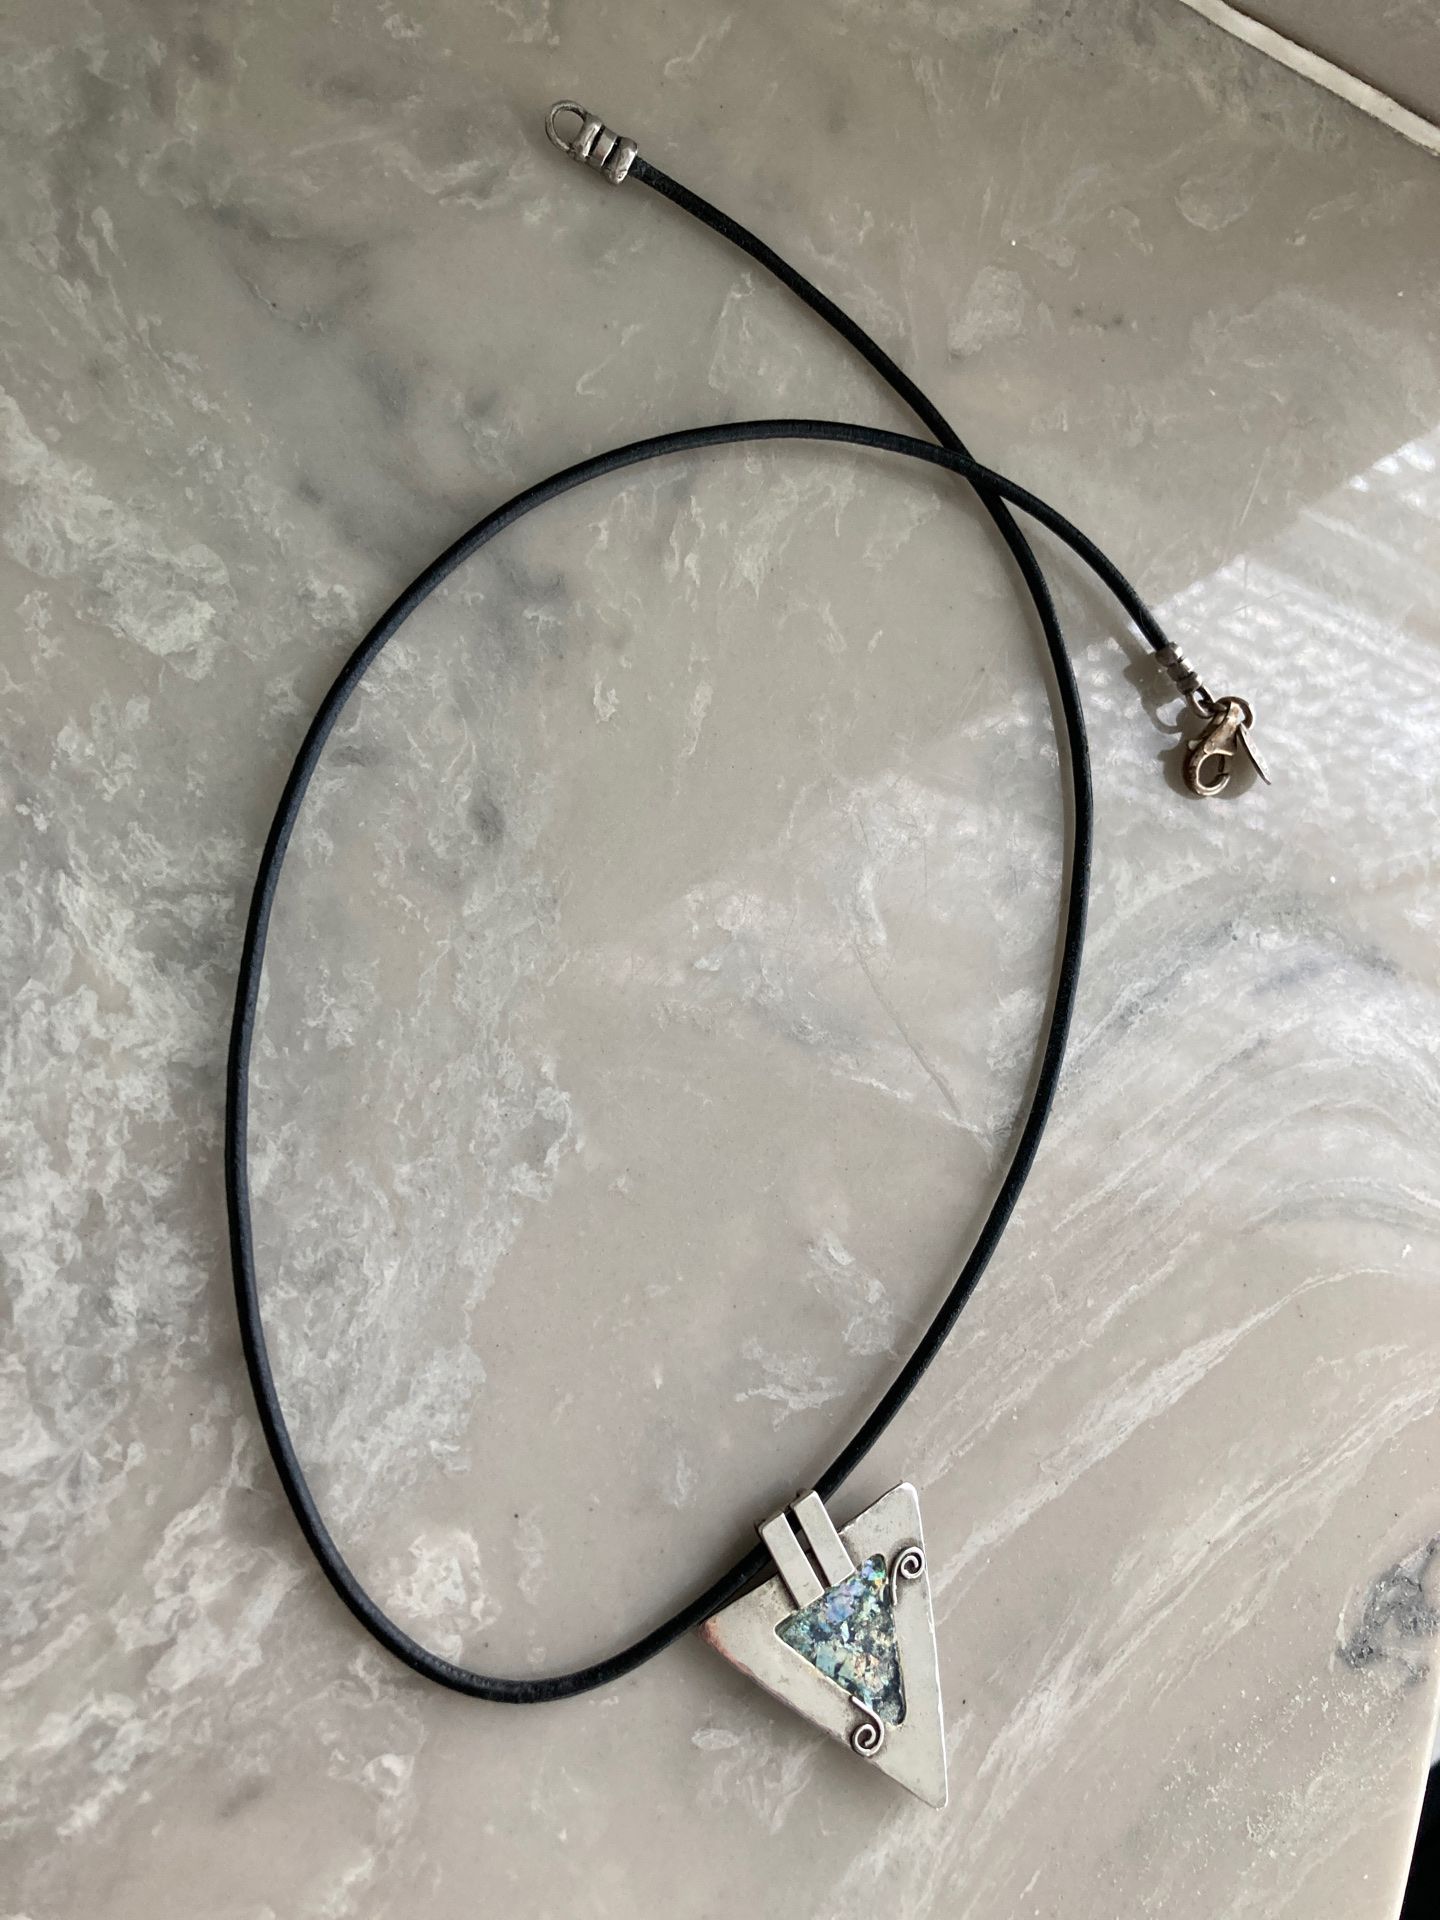 Sterling silver 925 & black leather artist signed necklace. Moonstone opal stone? Native American Indian Navajo? Art Deco? Modern Vintage Beautiful!